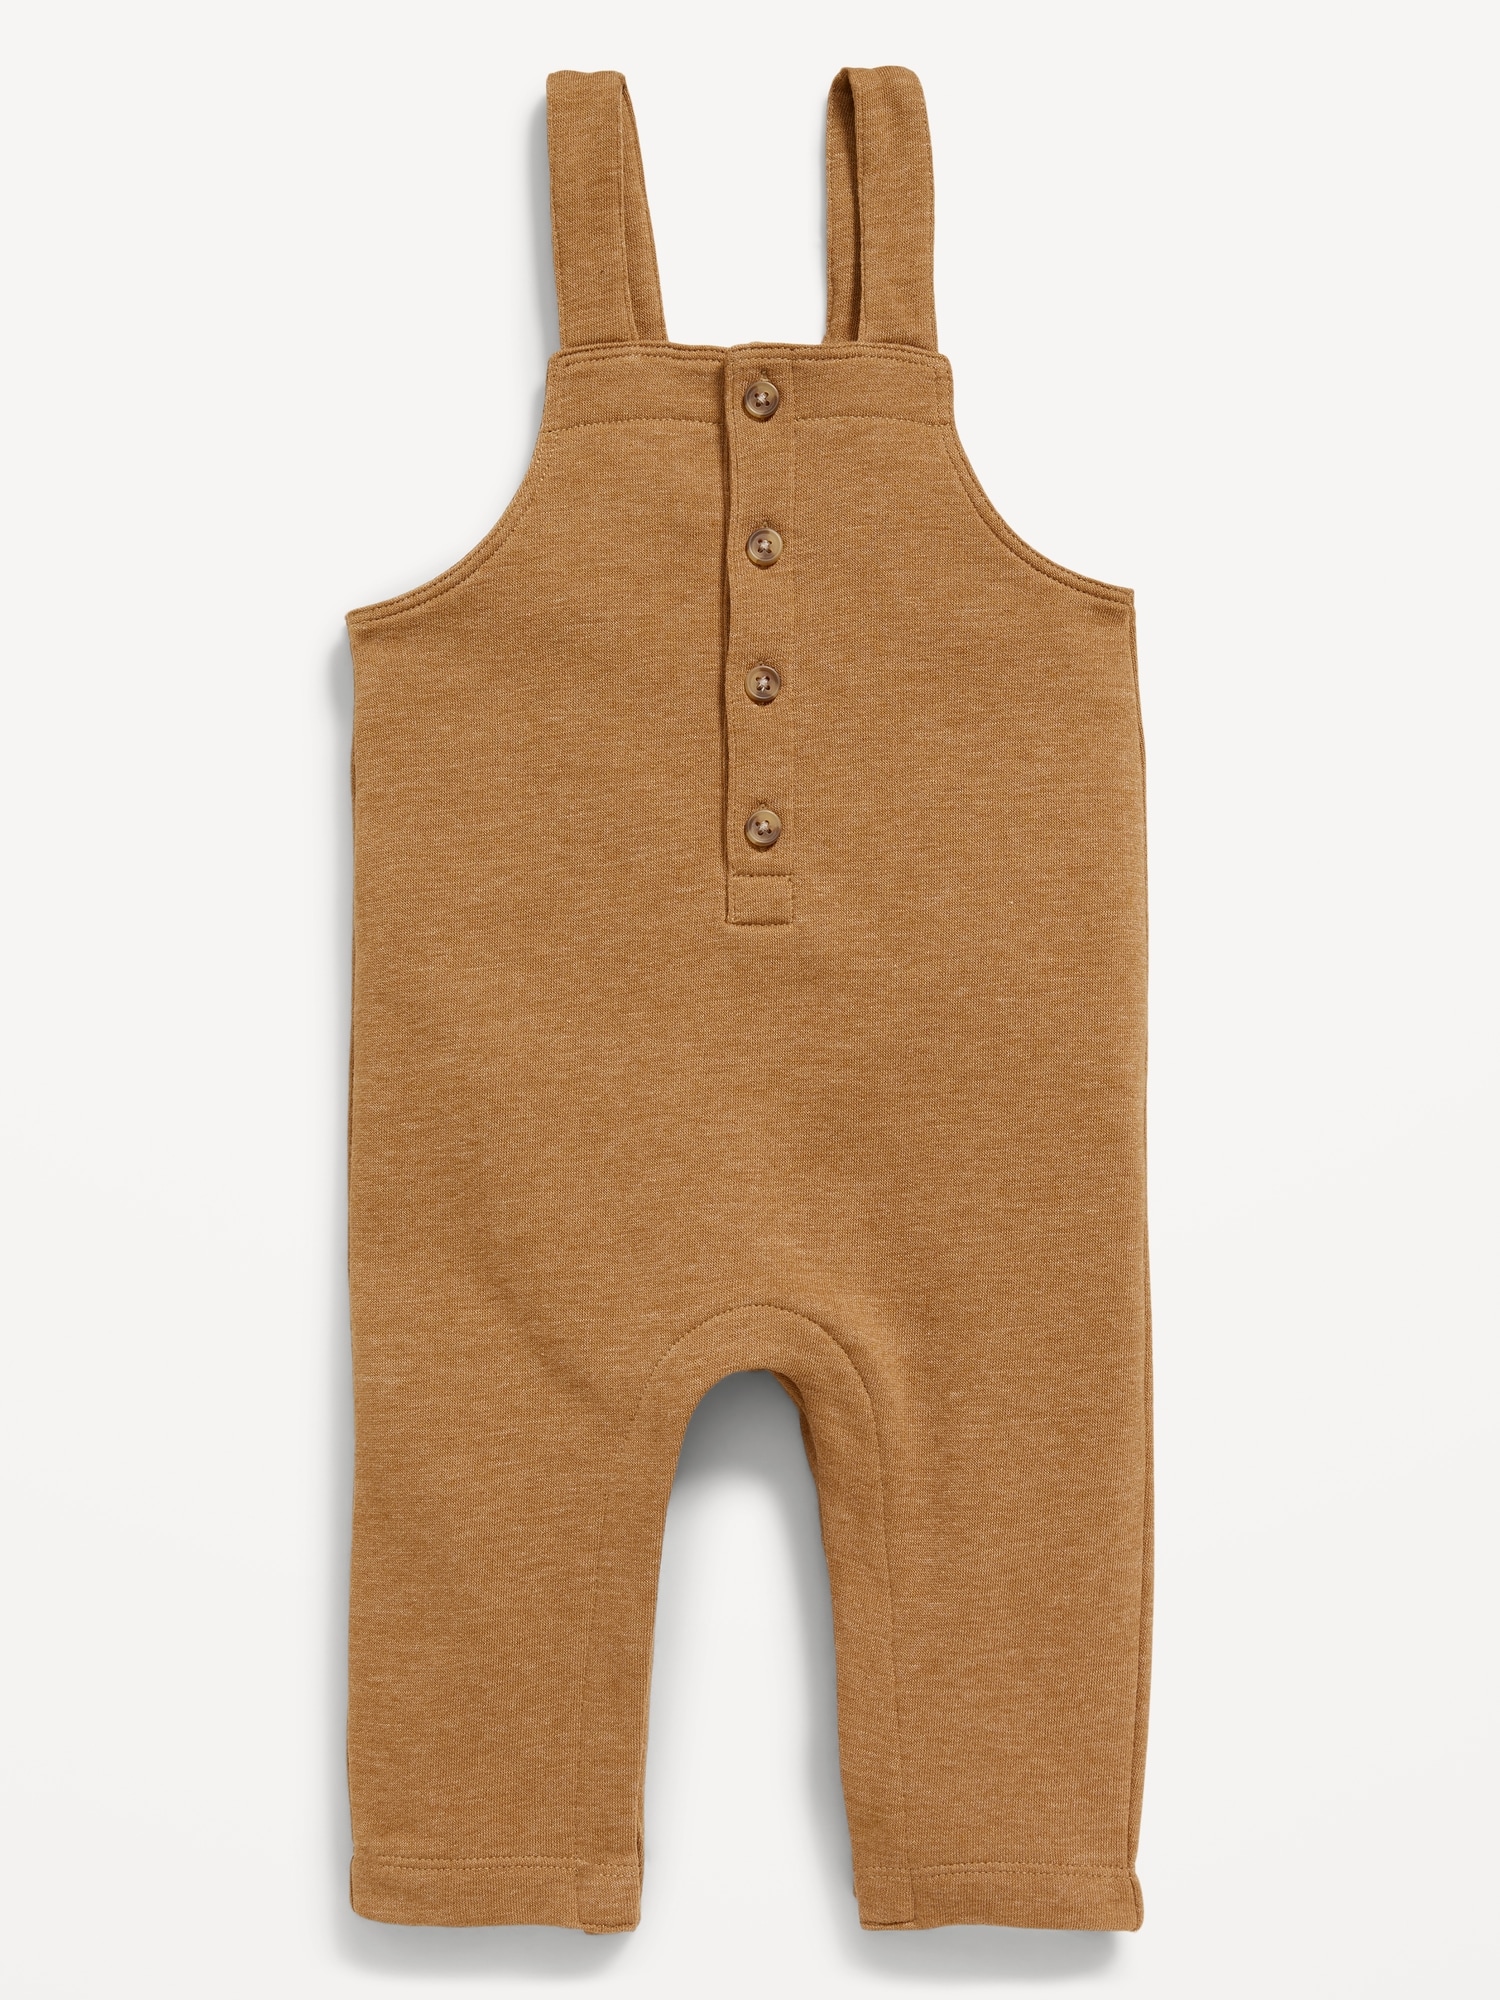 Unisex Sleeveless Button-Front Overalls for Baby